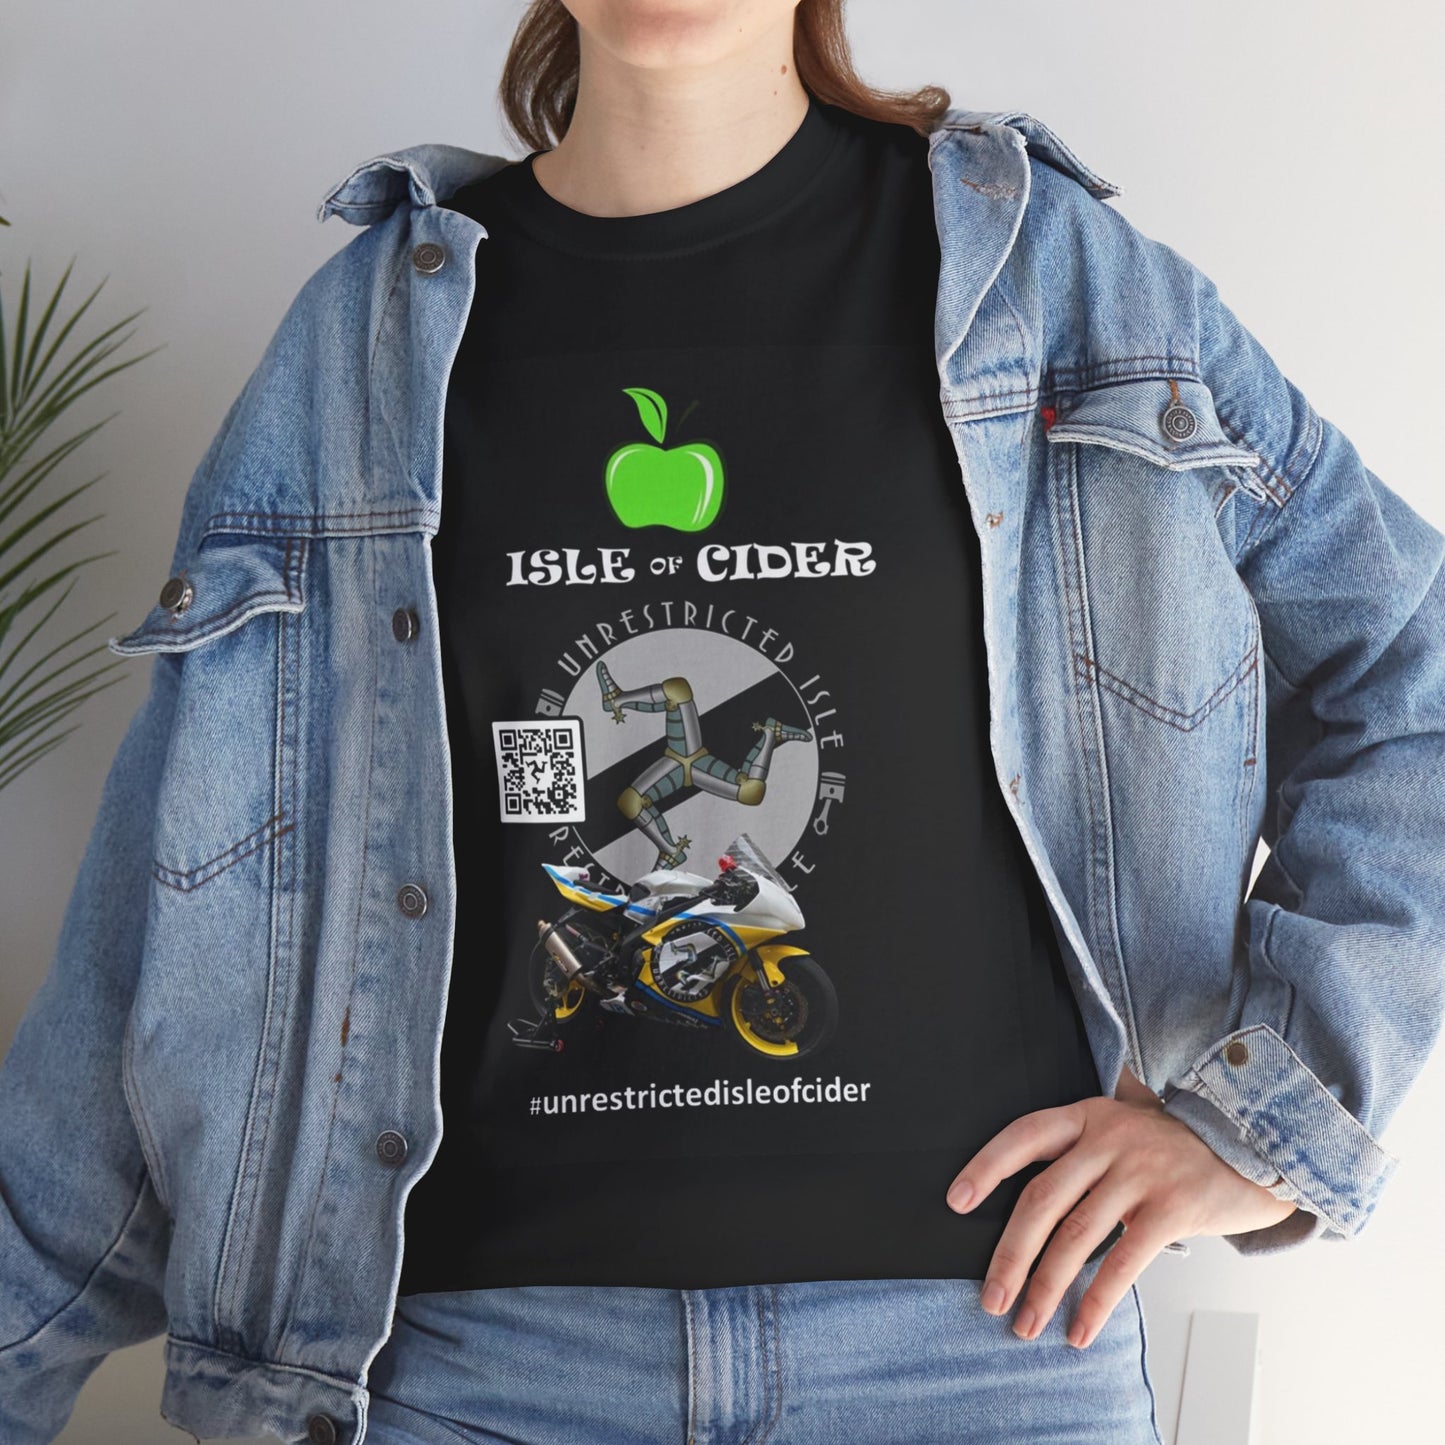 Unrestricted Isle of Cider T-Shirt